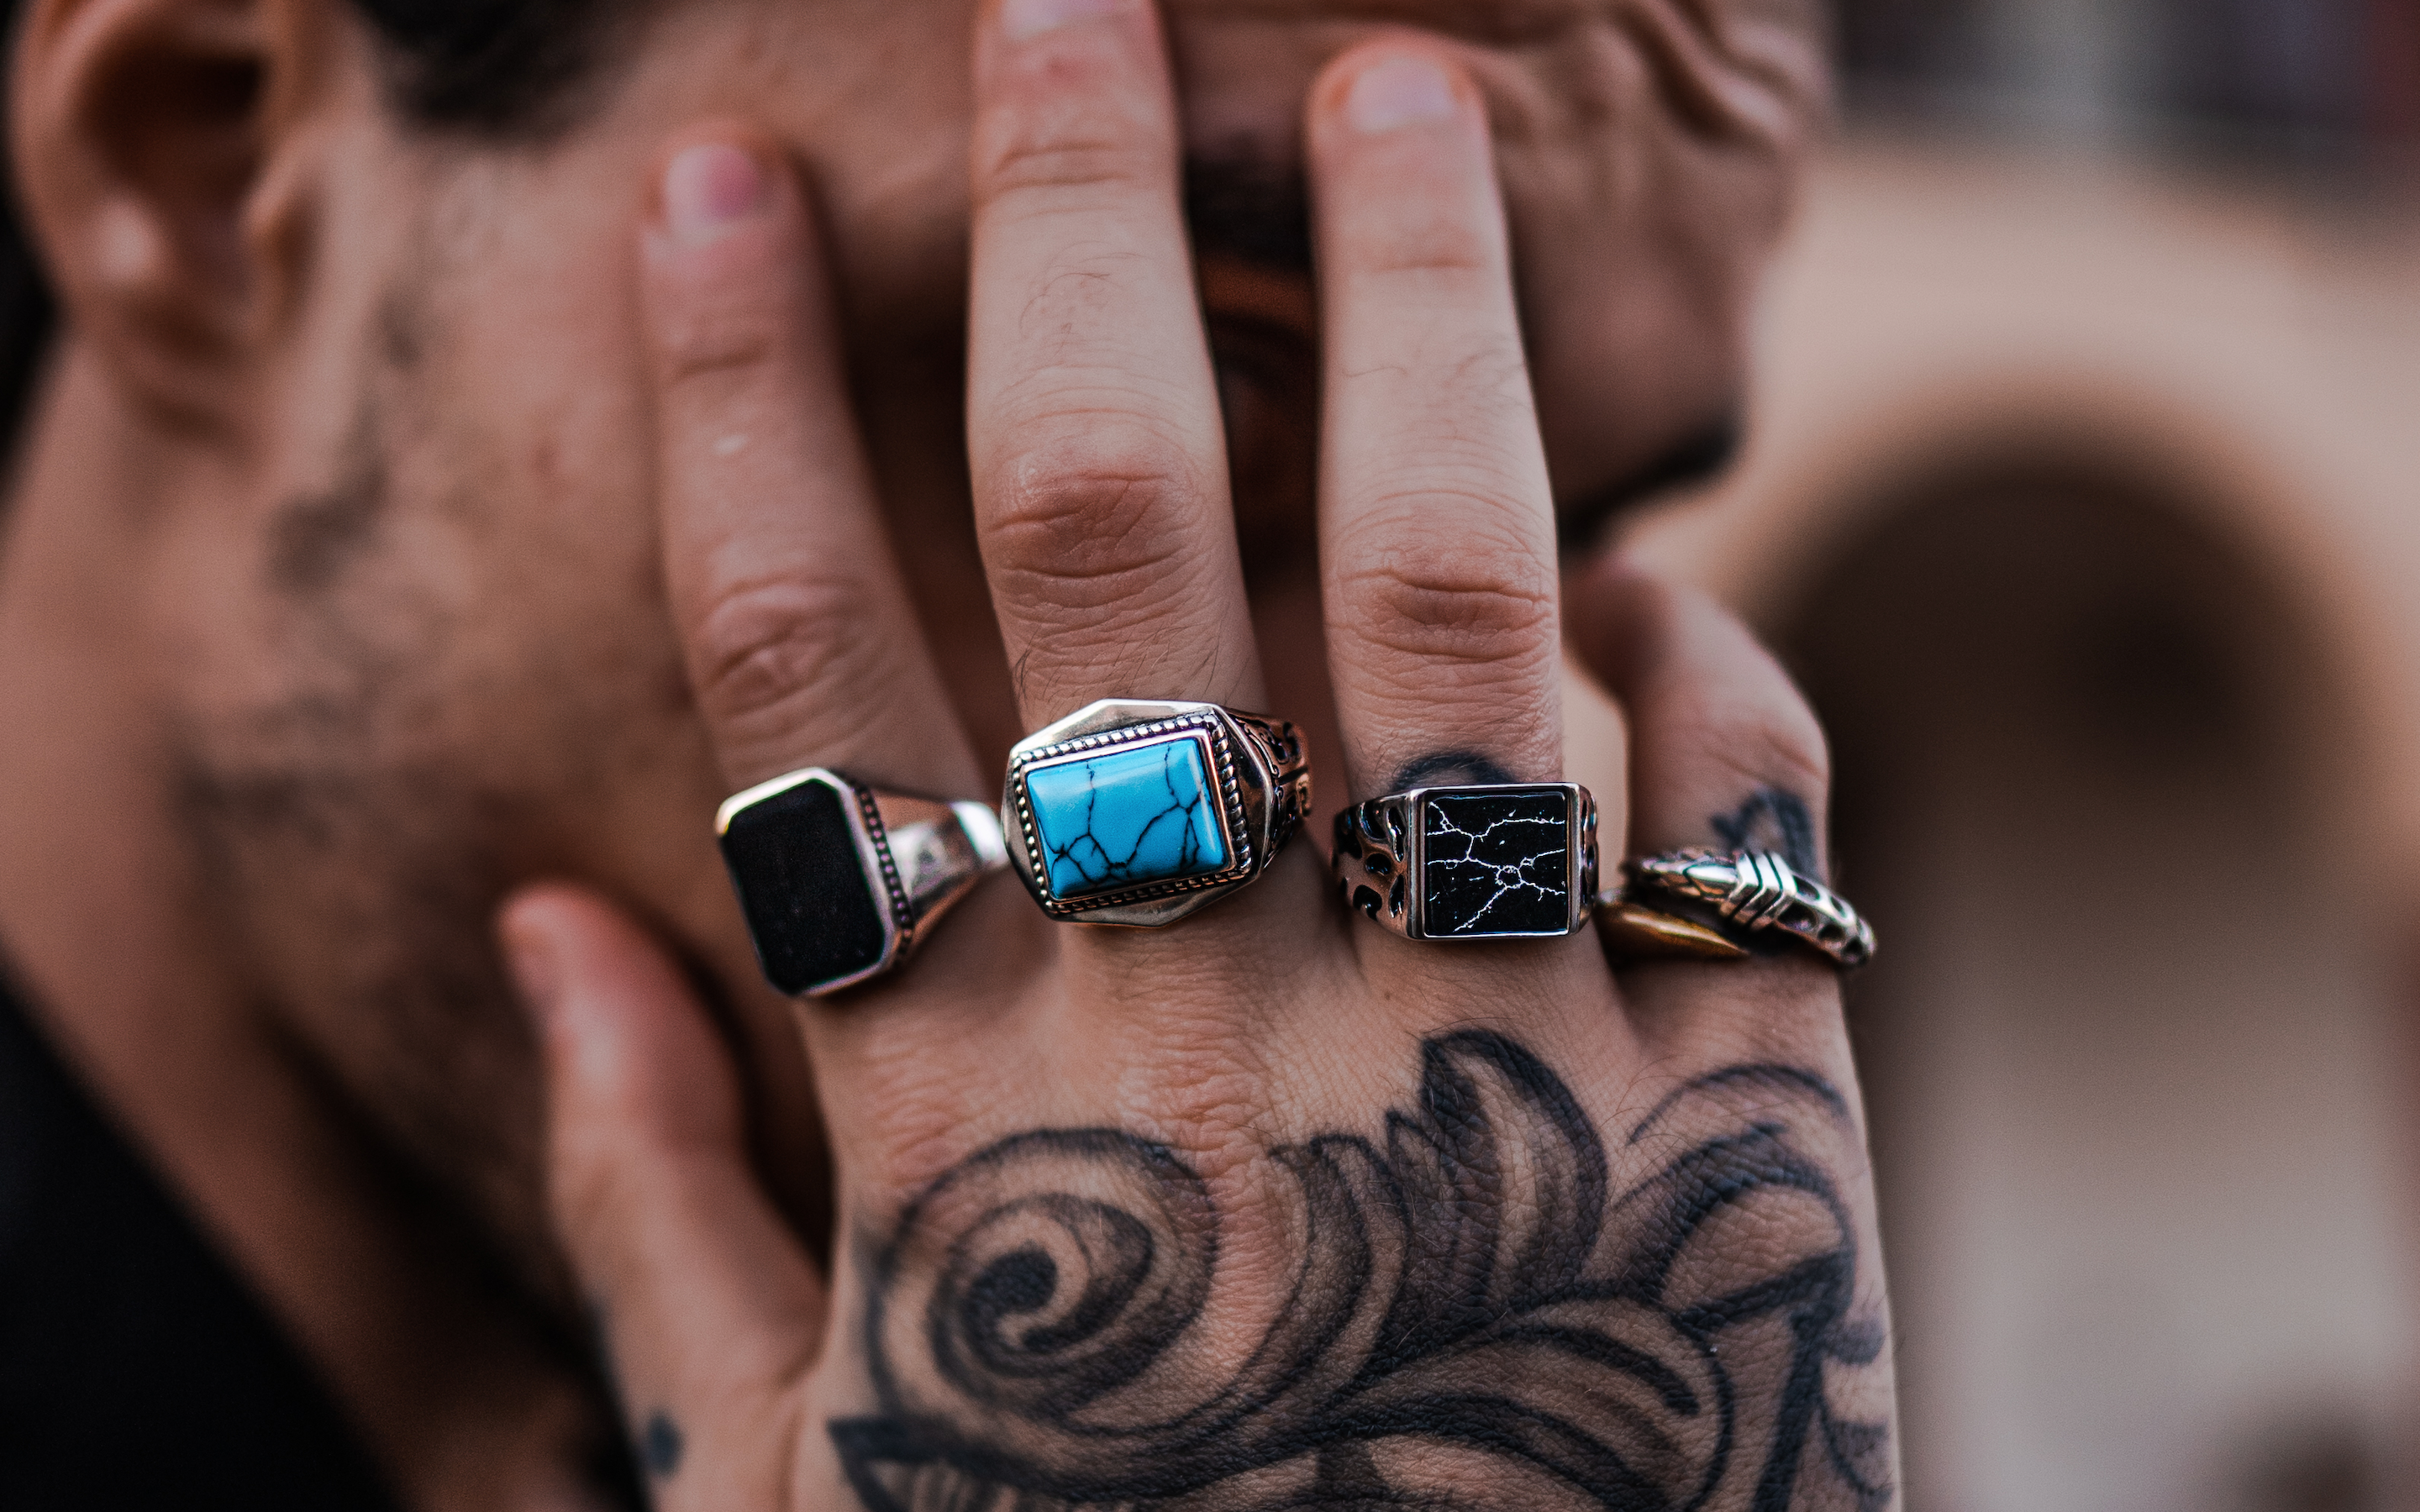 A man with tattoos and rings on his hands.